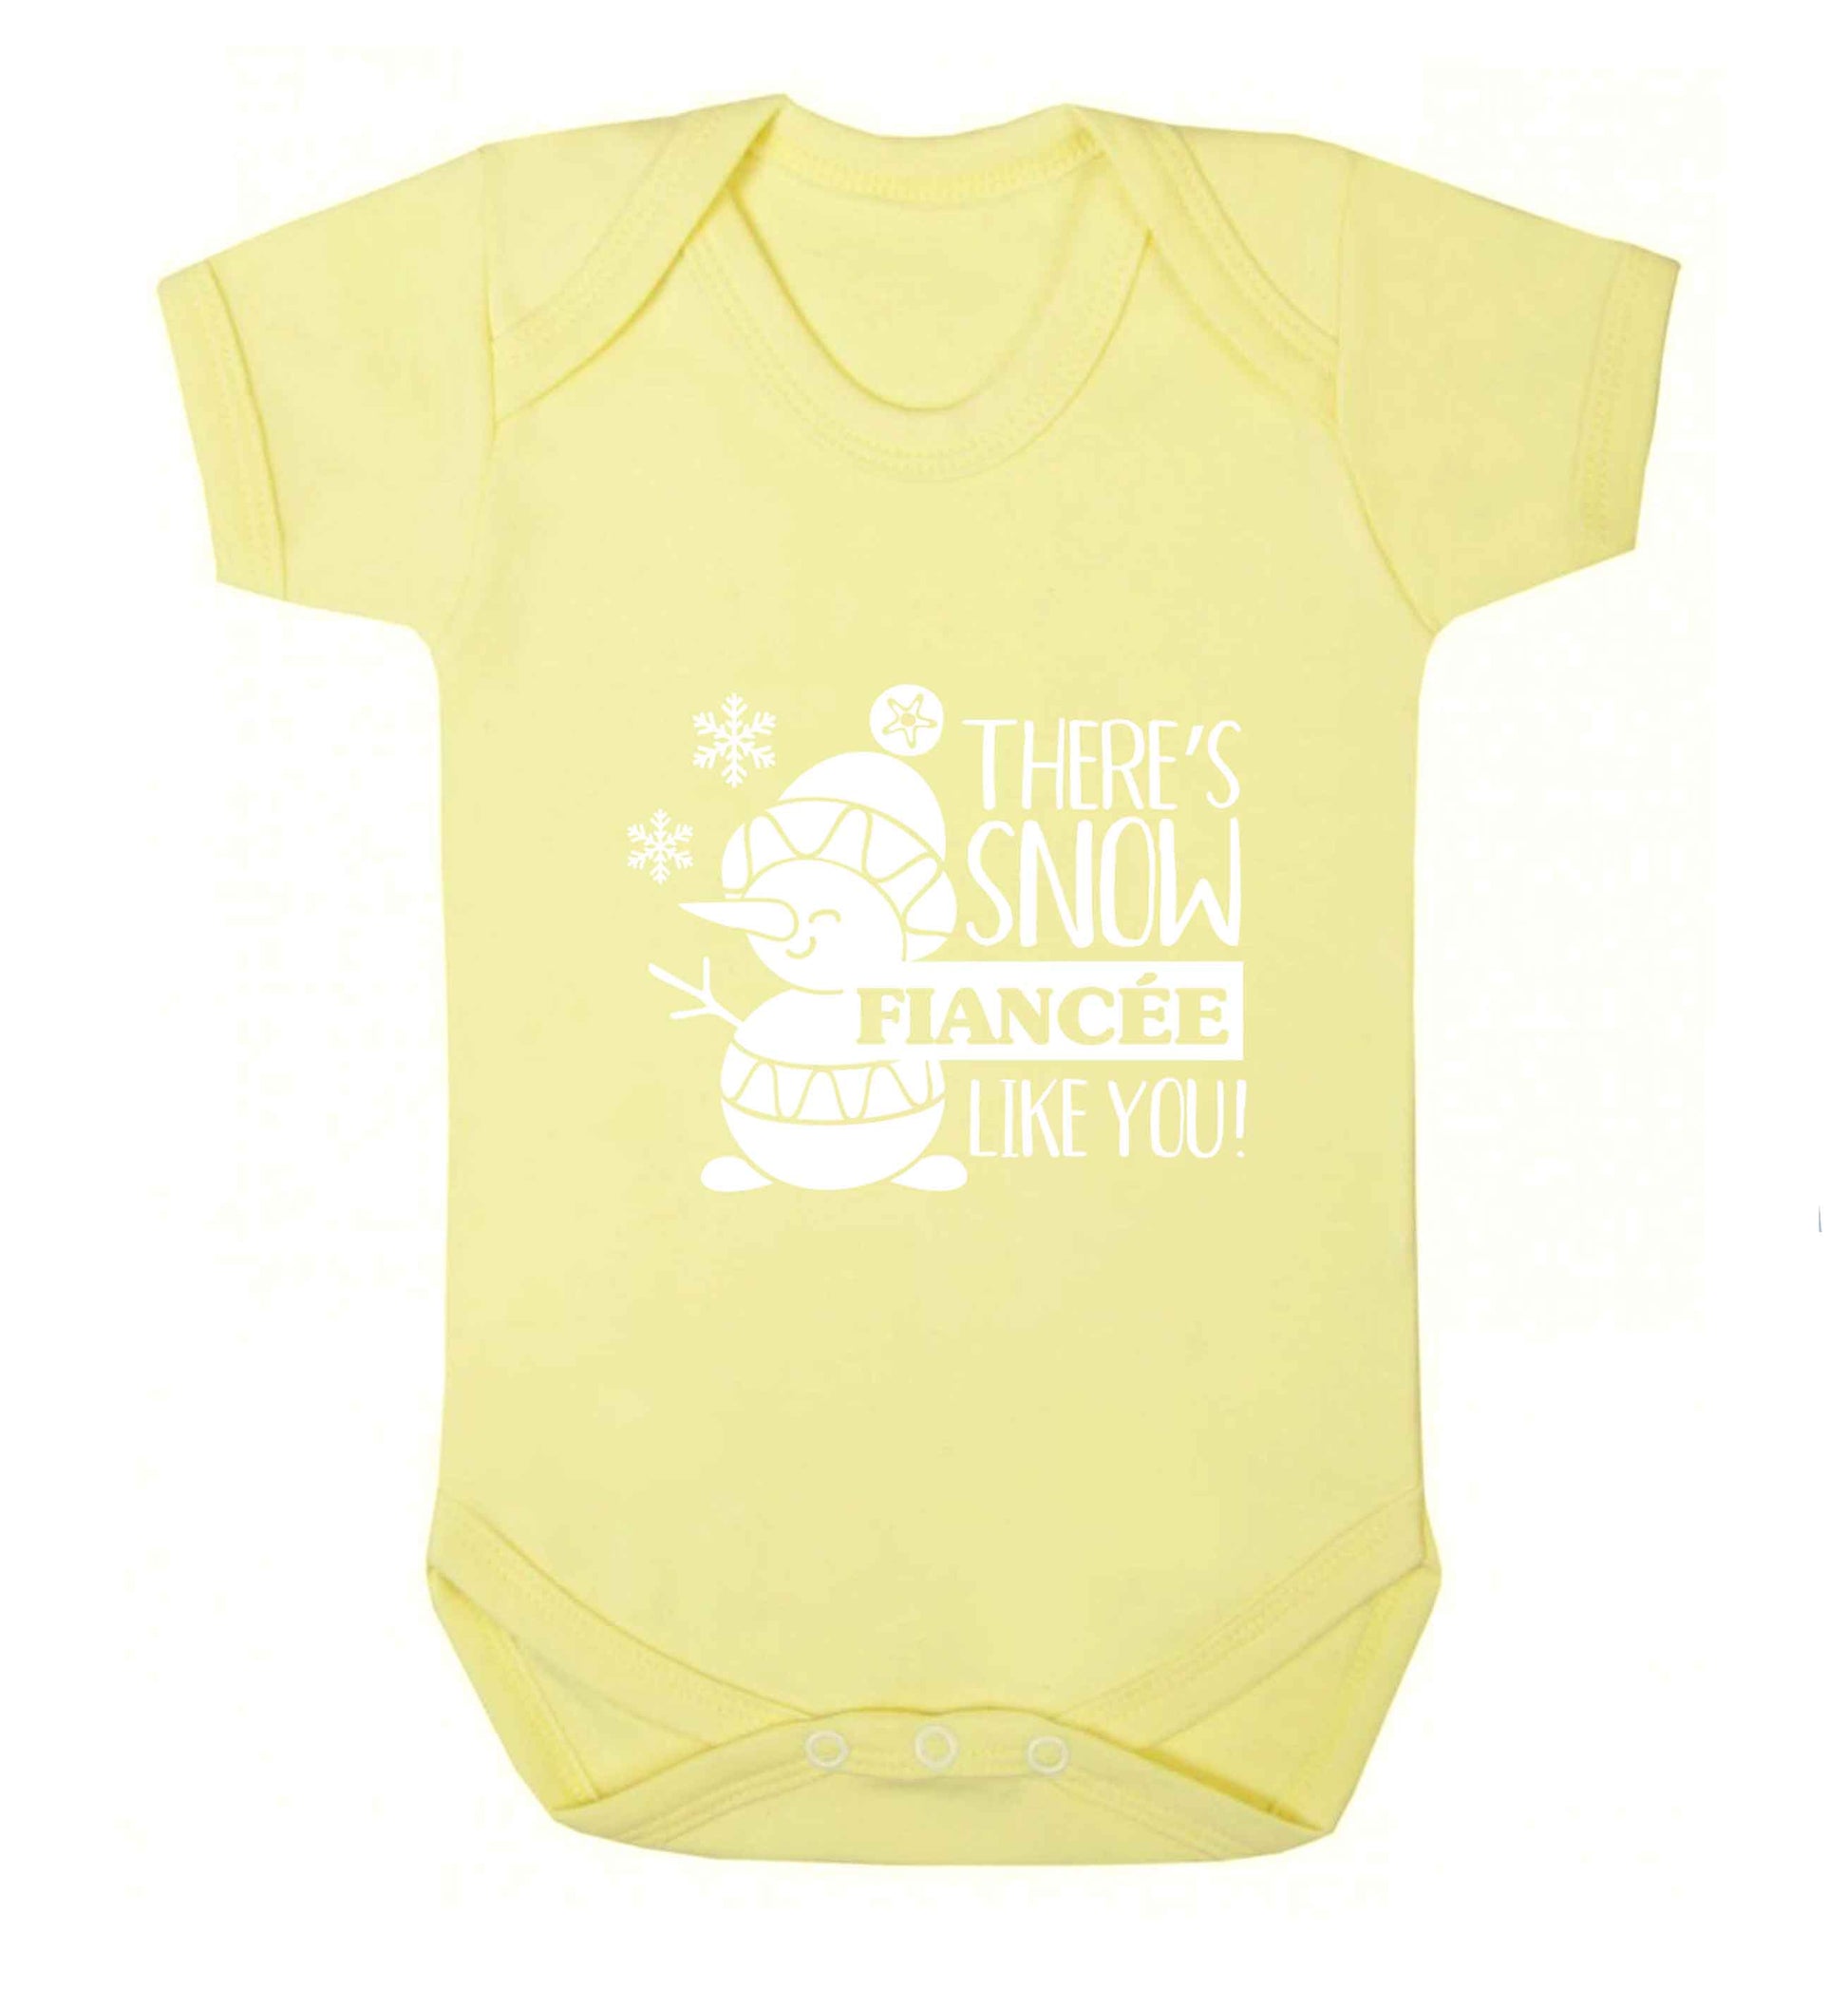 There's snow fiancee like you baby vest pale yellow 18-24 months